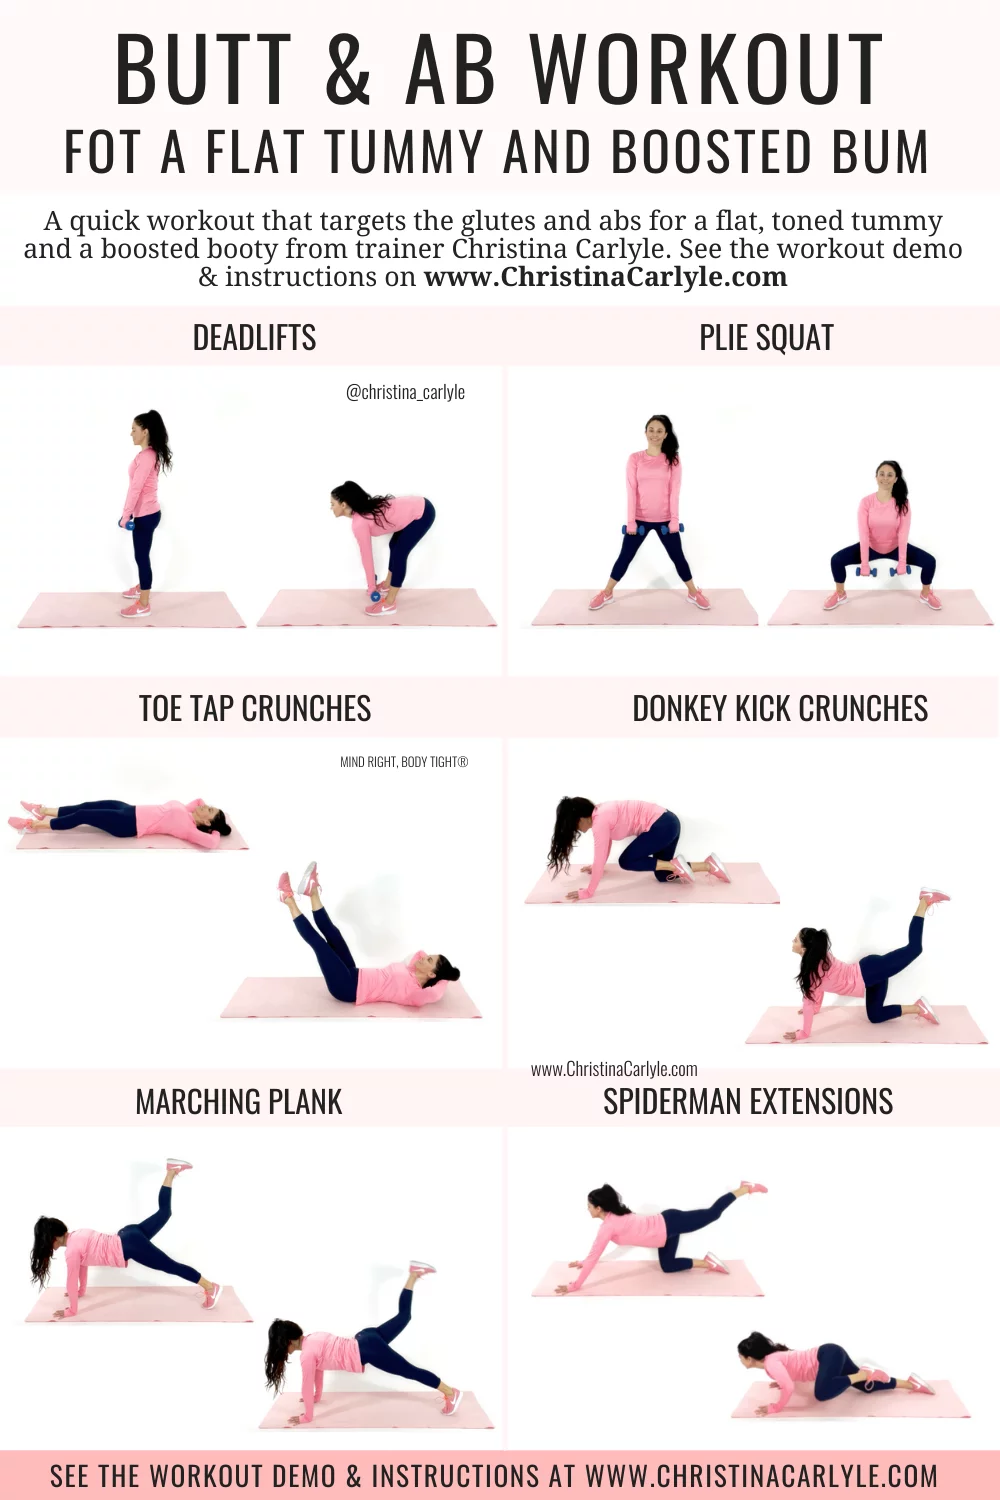 Butt and Ab Workout for Curves in all the Right Places